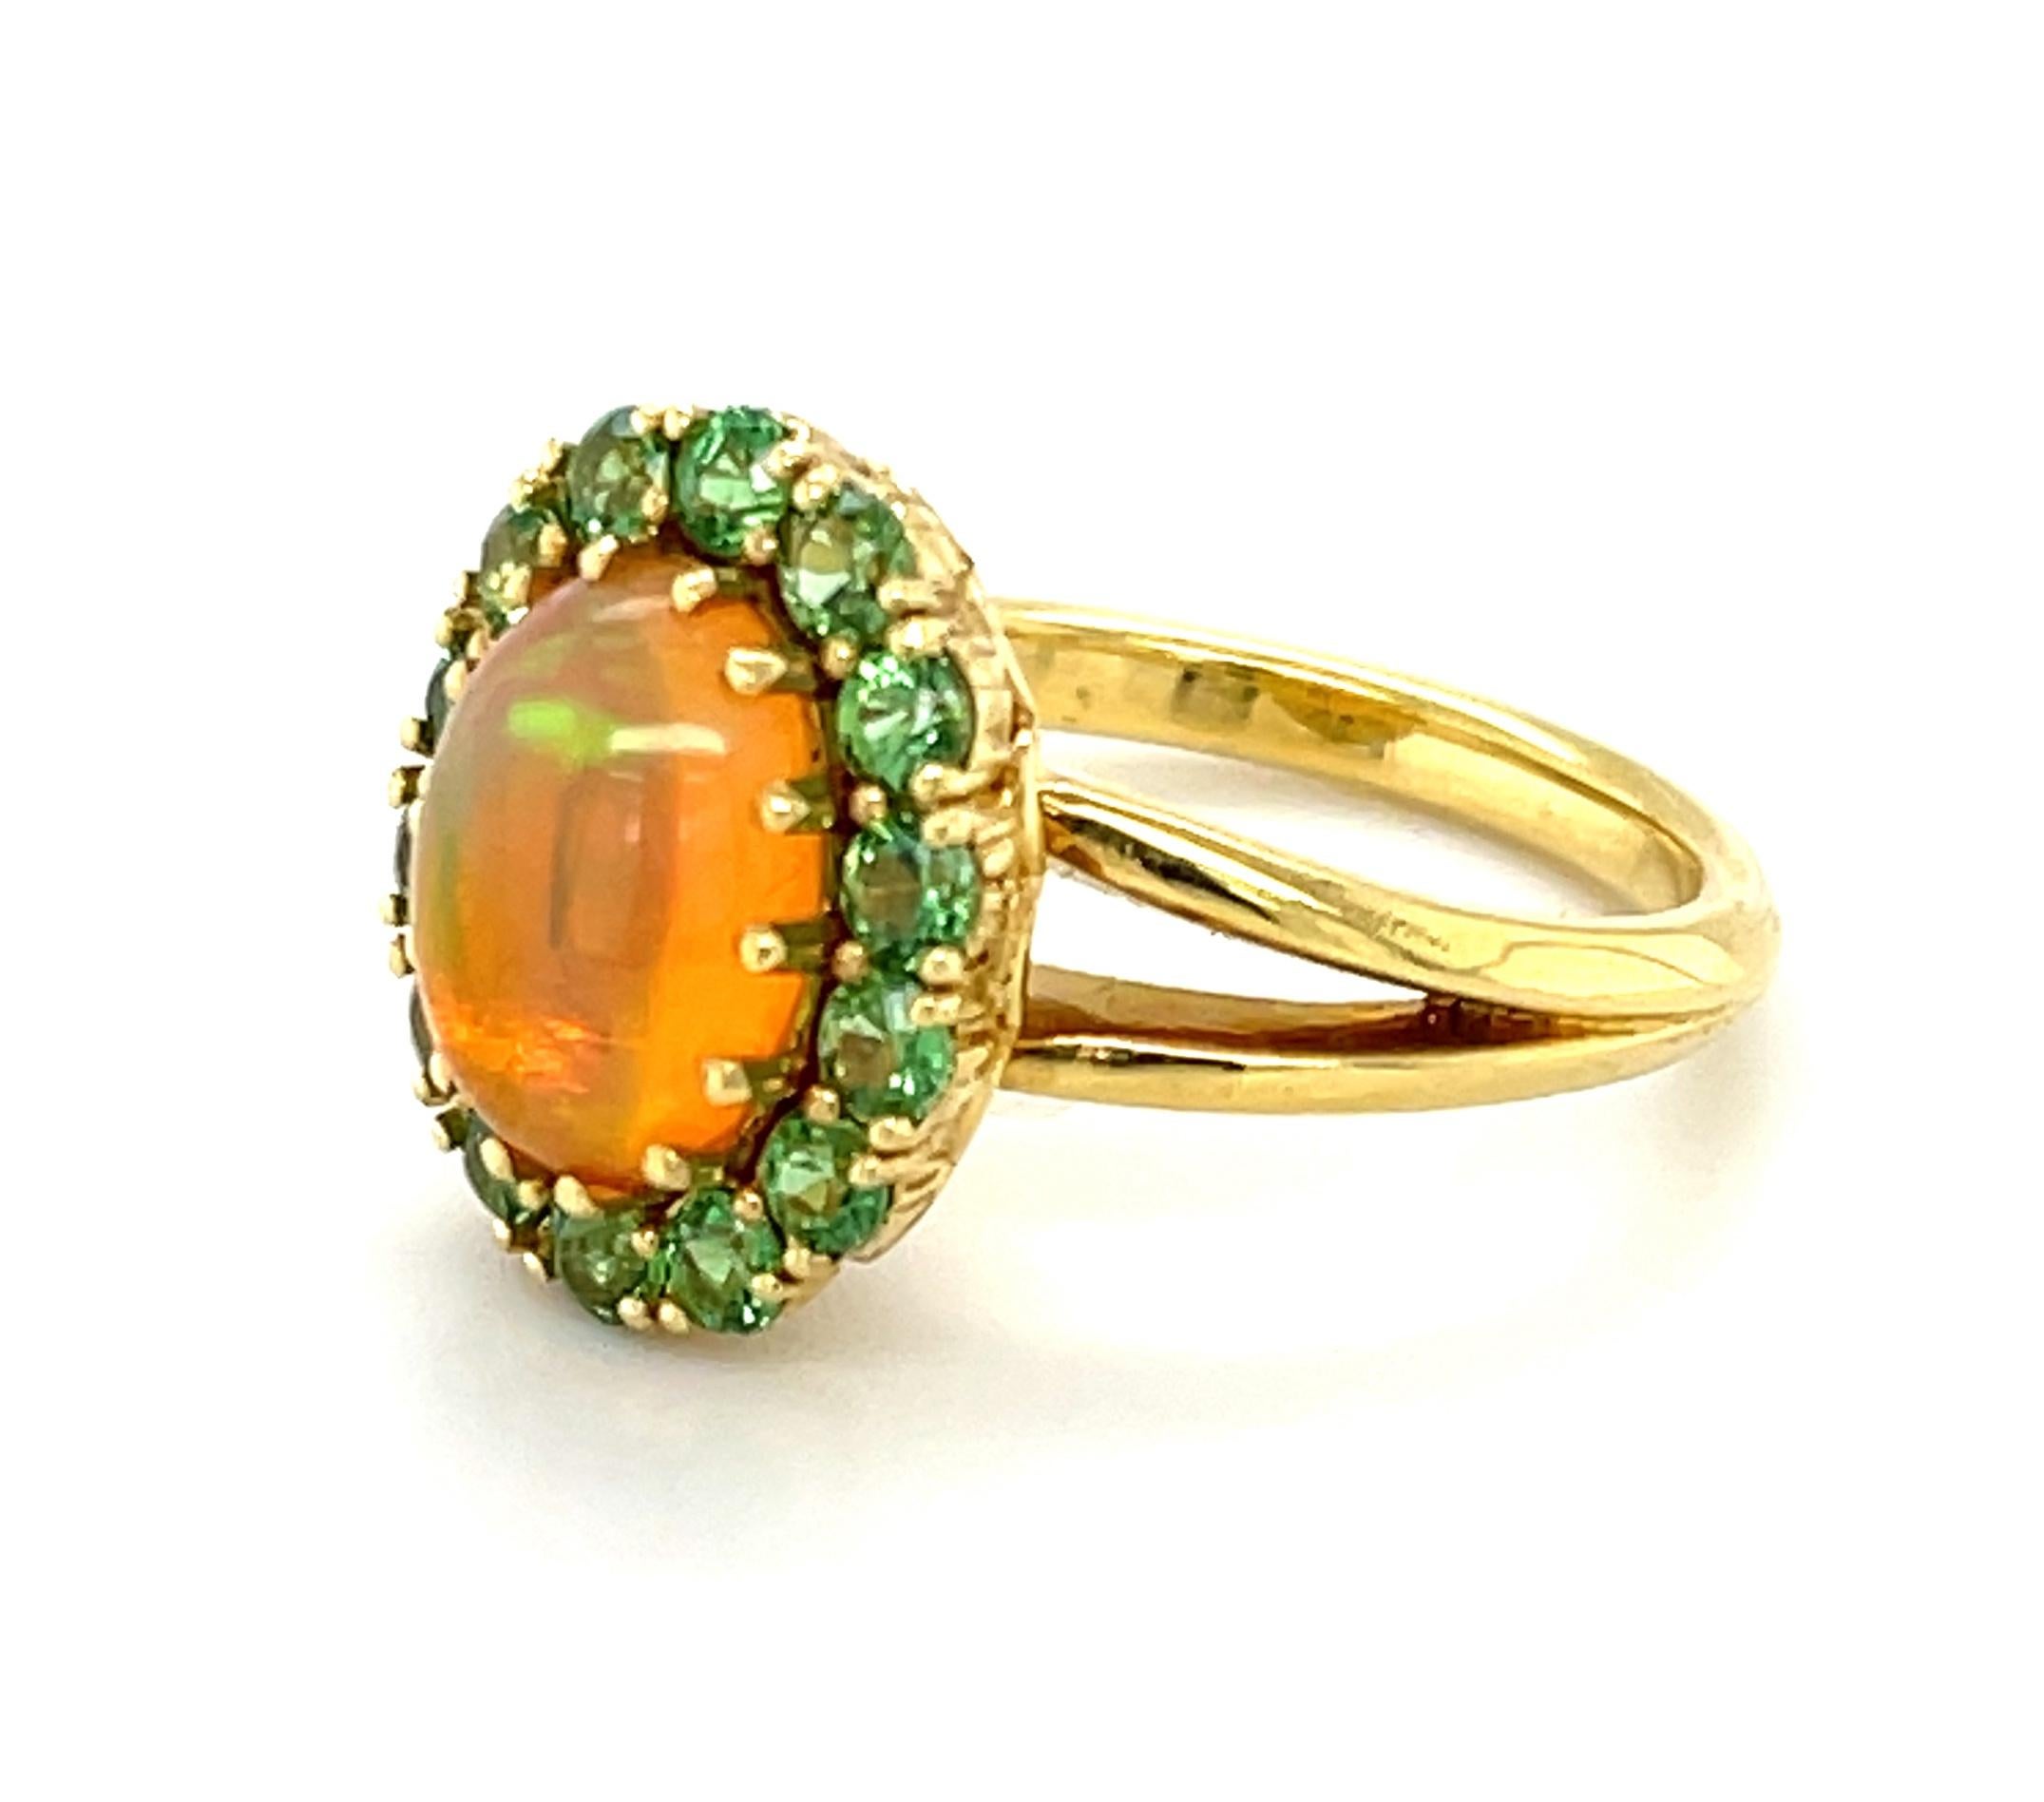 1.91 Carat Golden Opal and Tsavorite Garnet Cocktail Ring in Yellow Gold In New Condition For Sale In Los Angeles, CA